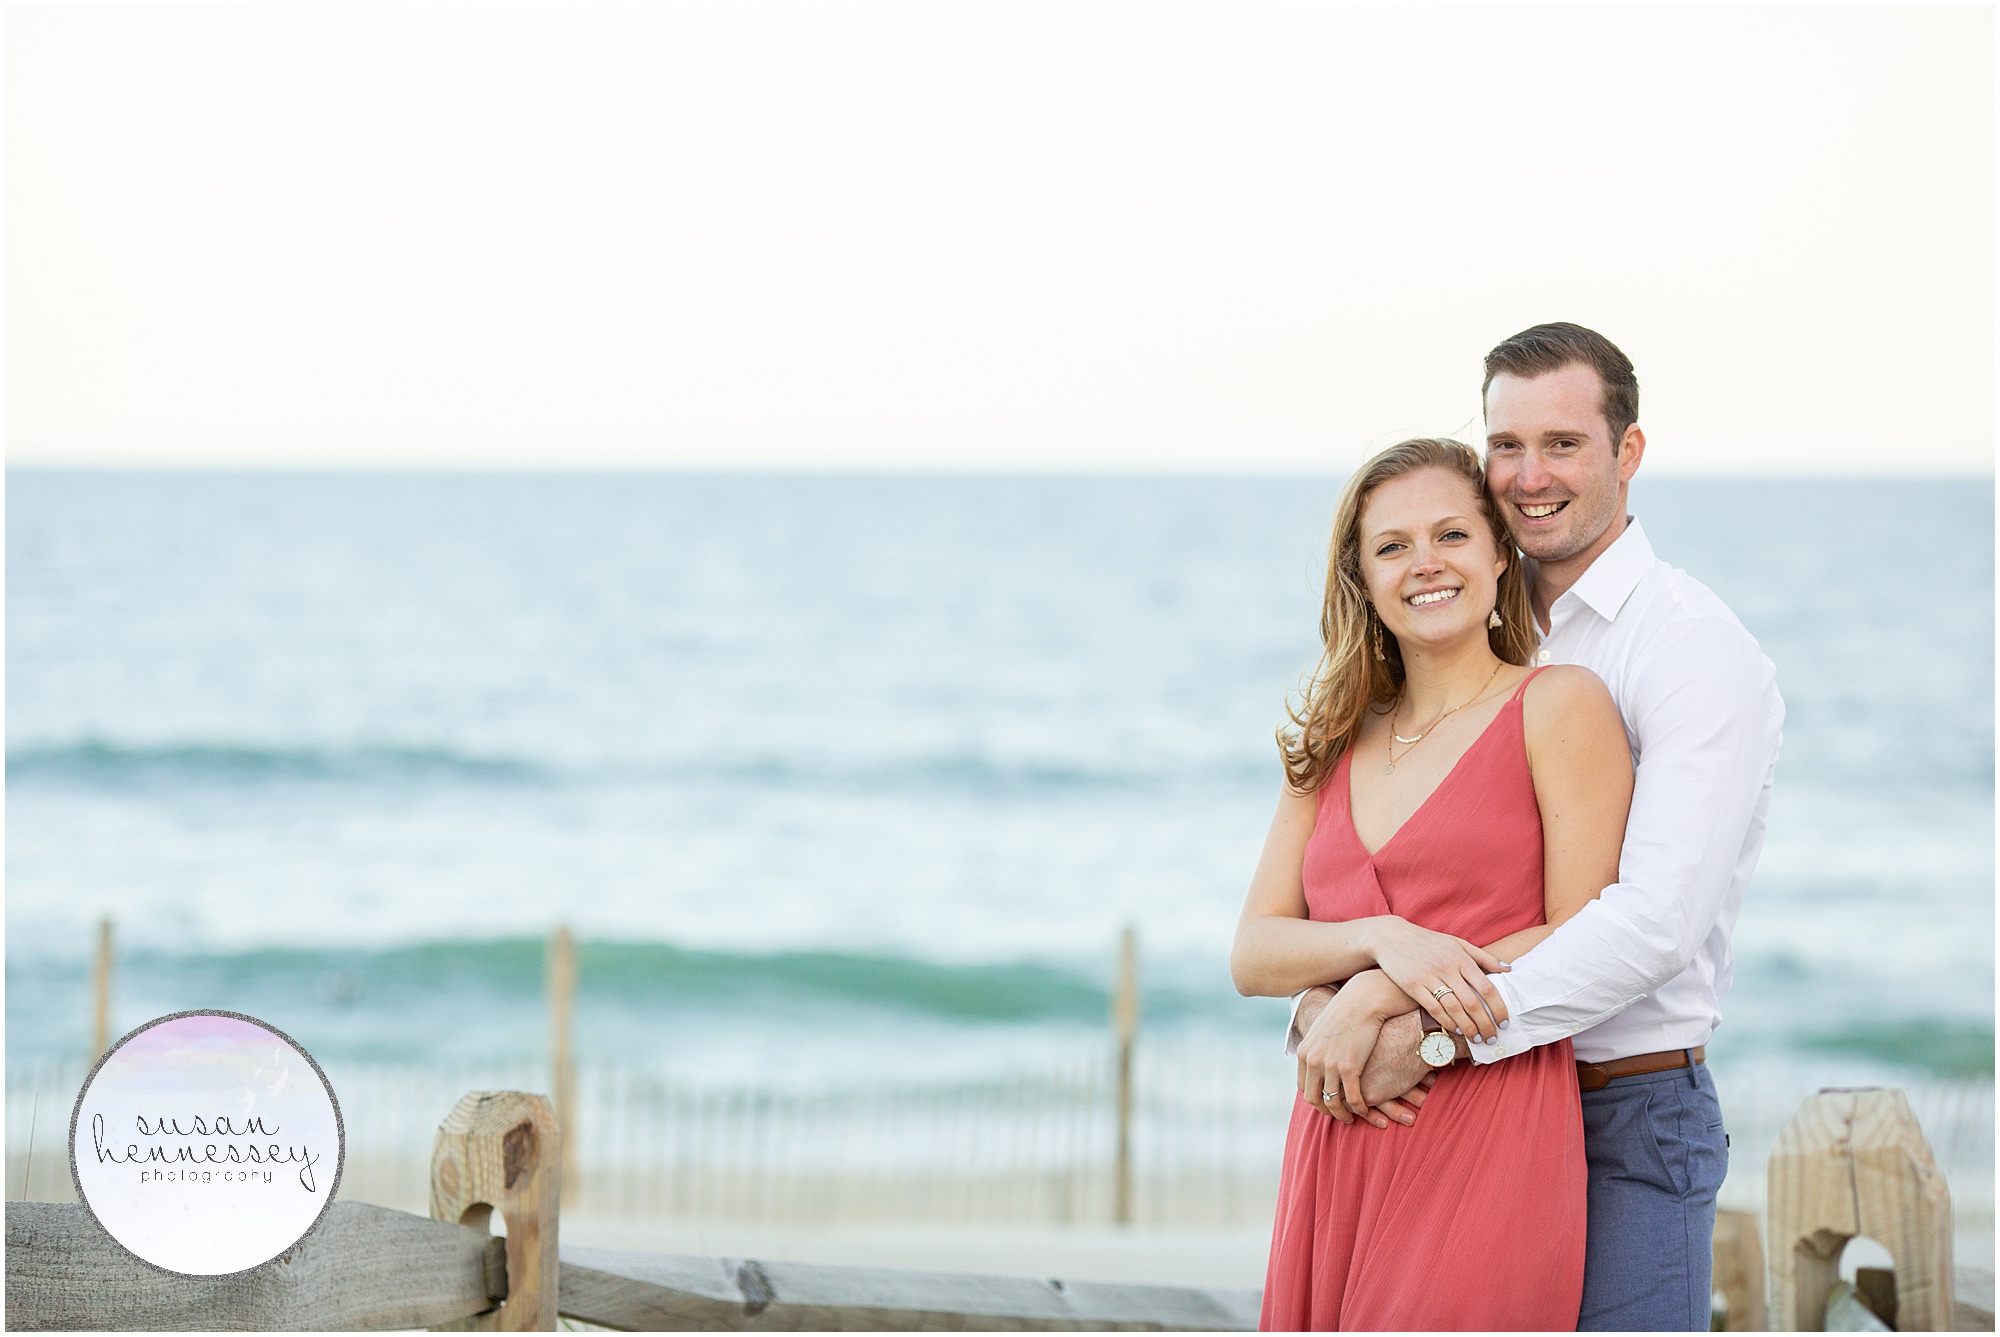 Engagement photography at the Jersey Shore